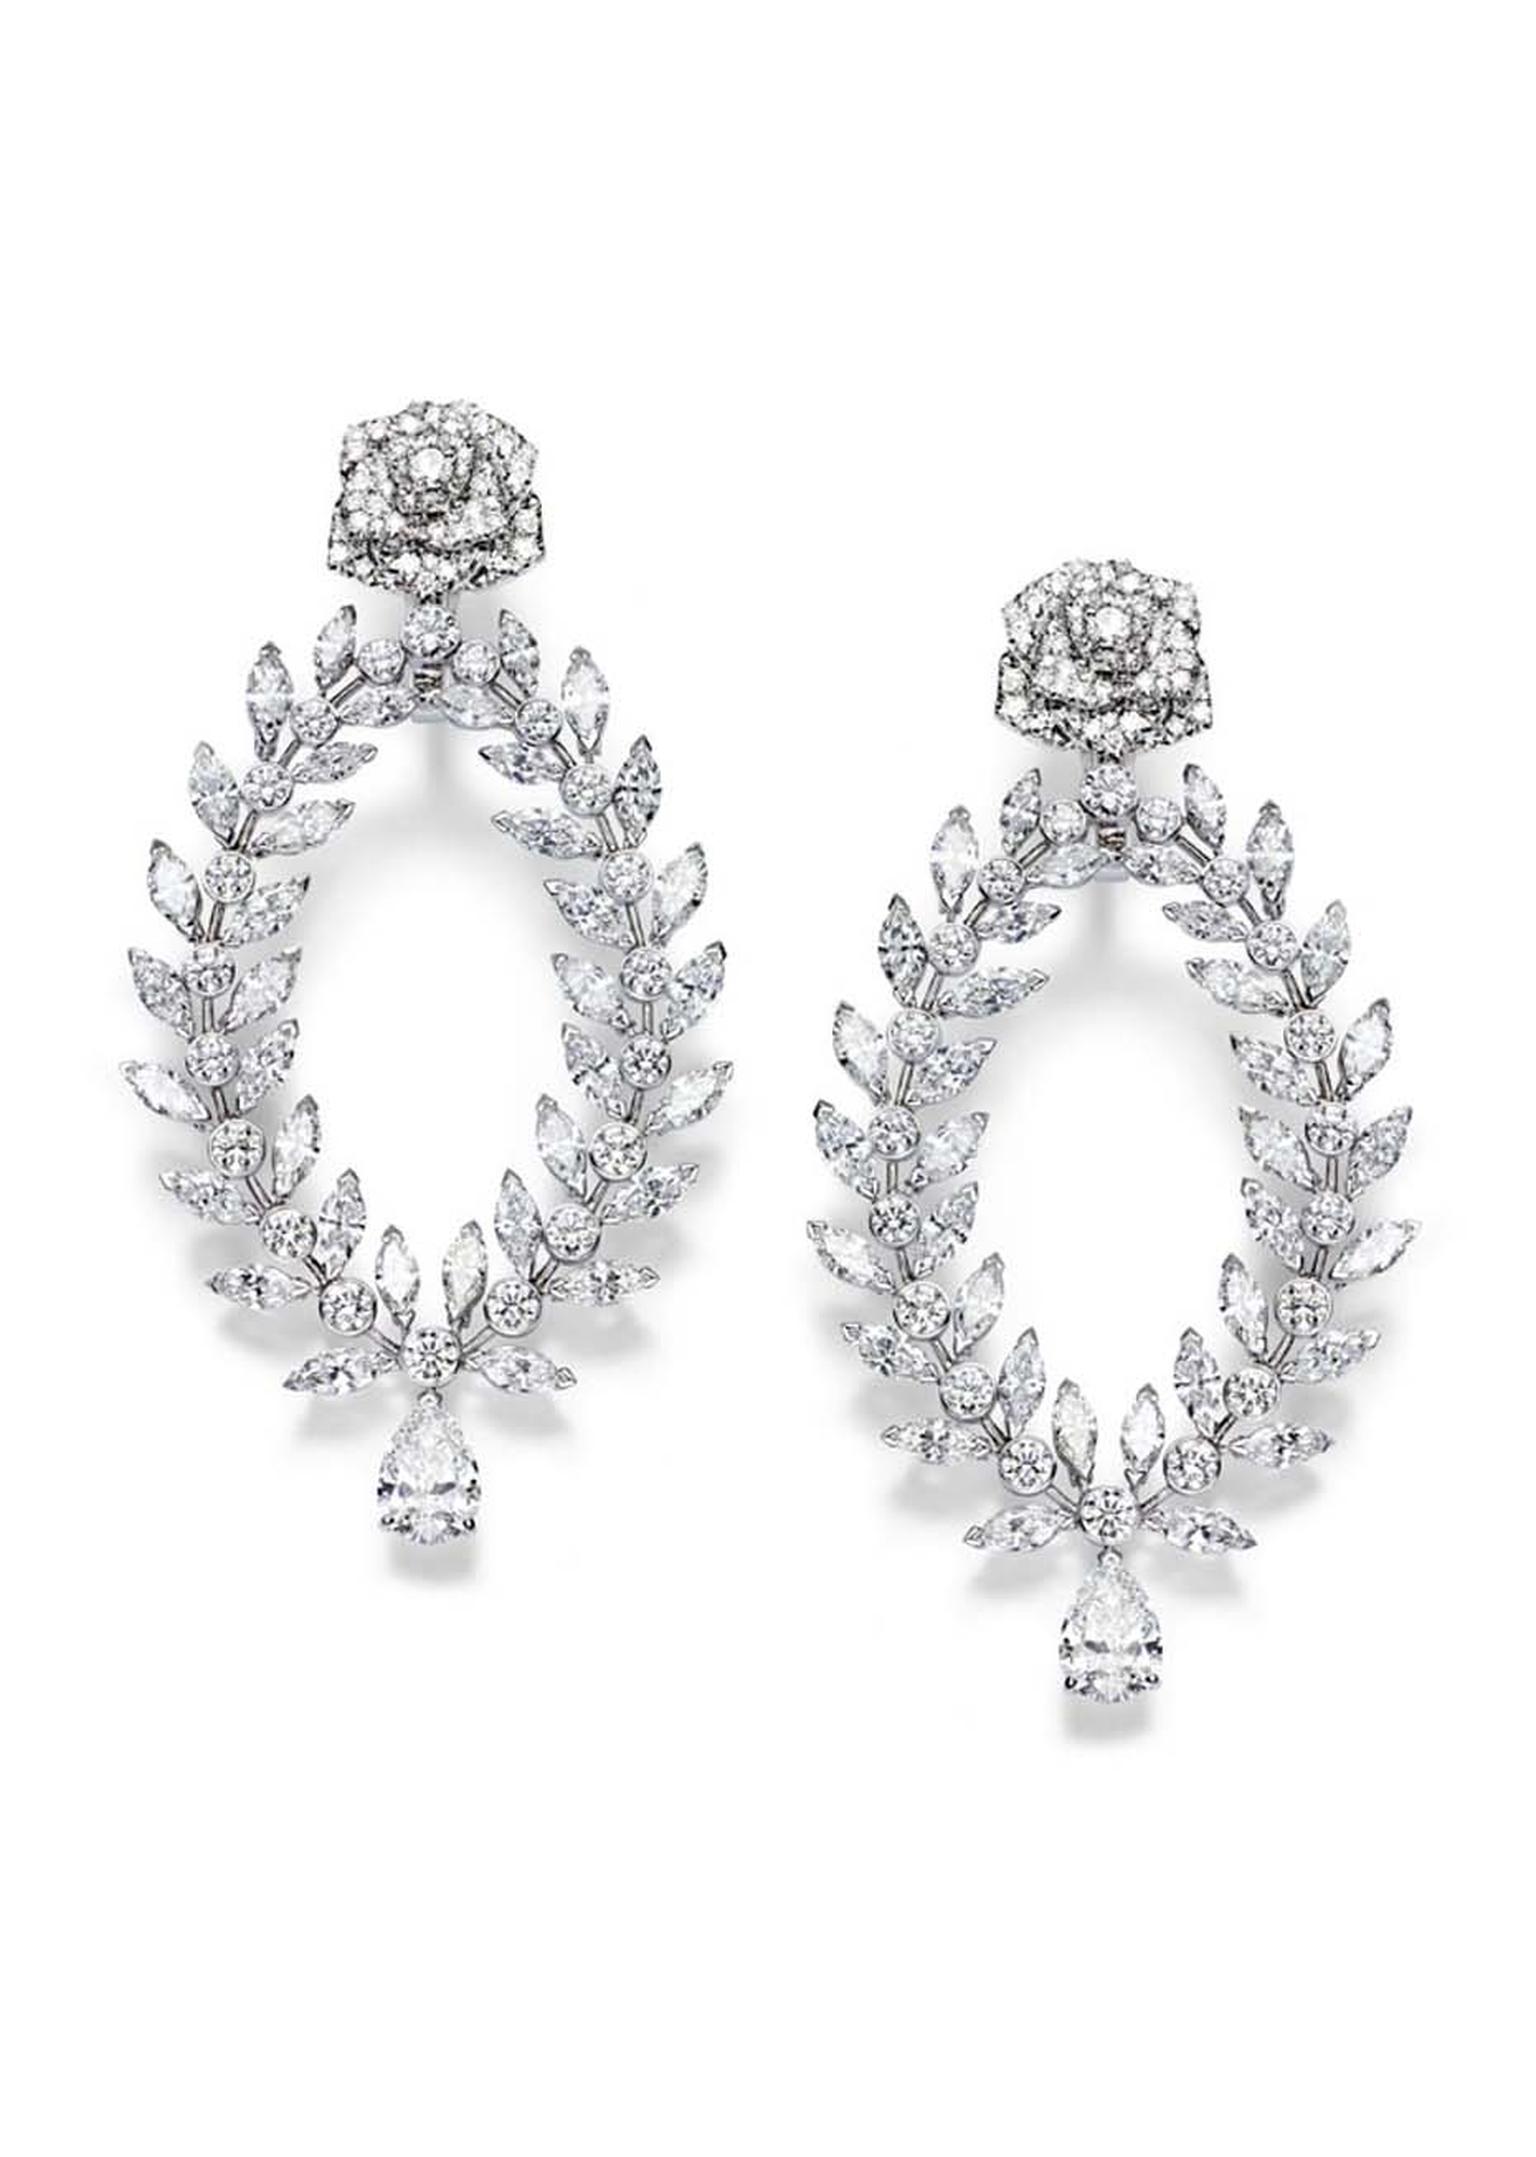 Piaget Rose diamond earrings also feature a stud in the shape of an exquisitely detailed rose.